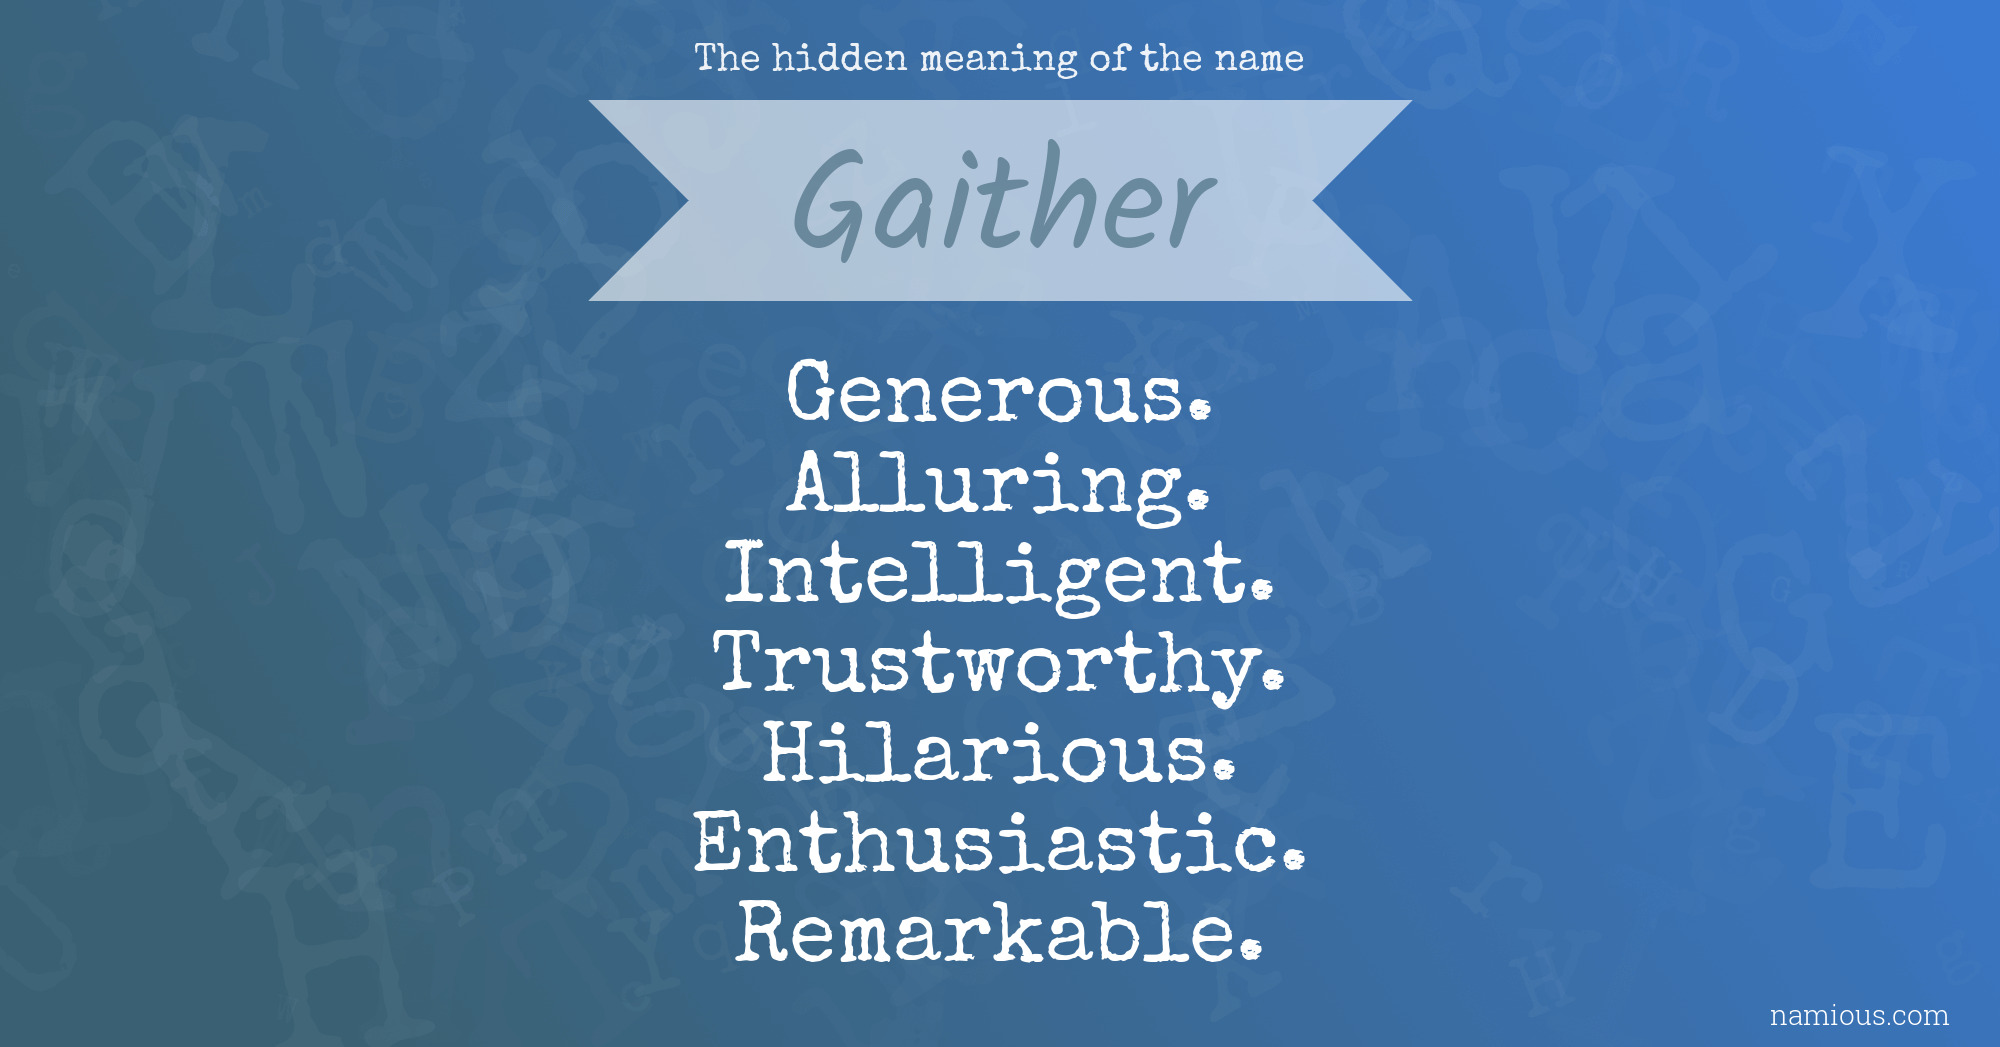 The hidden meaning of the name Gaither